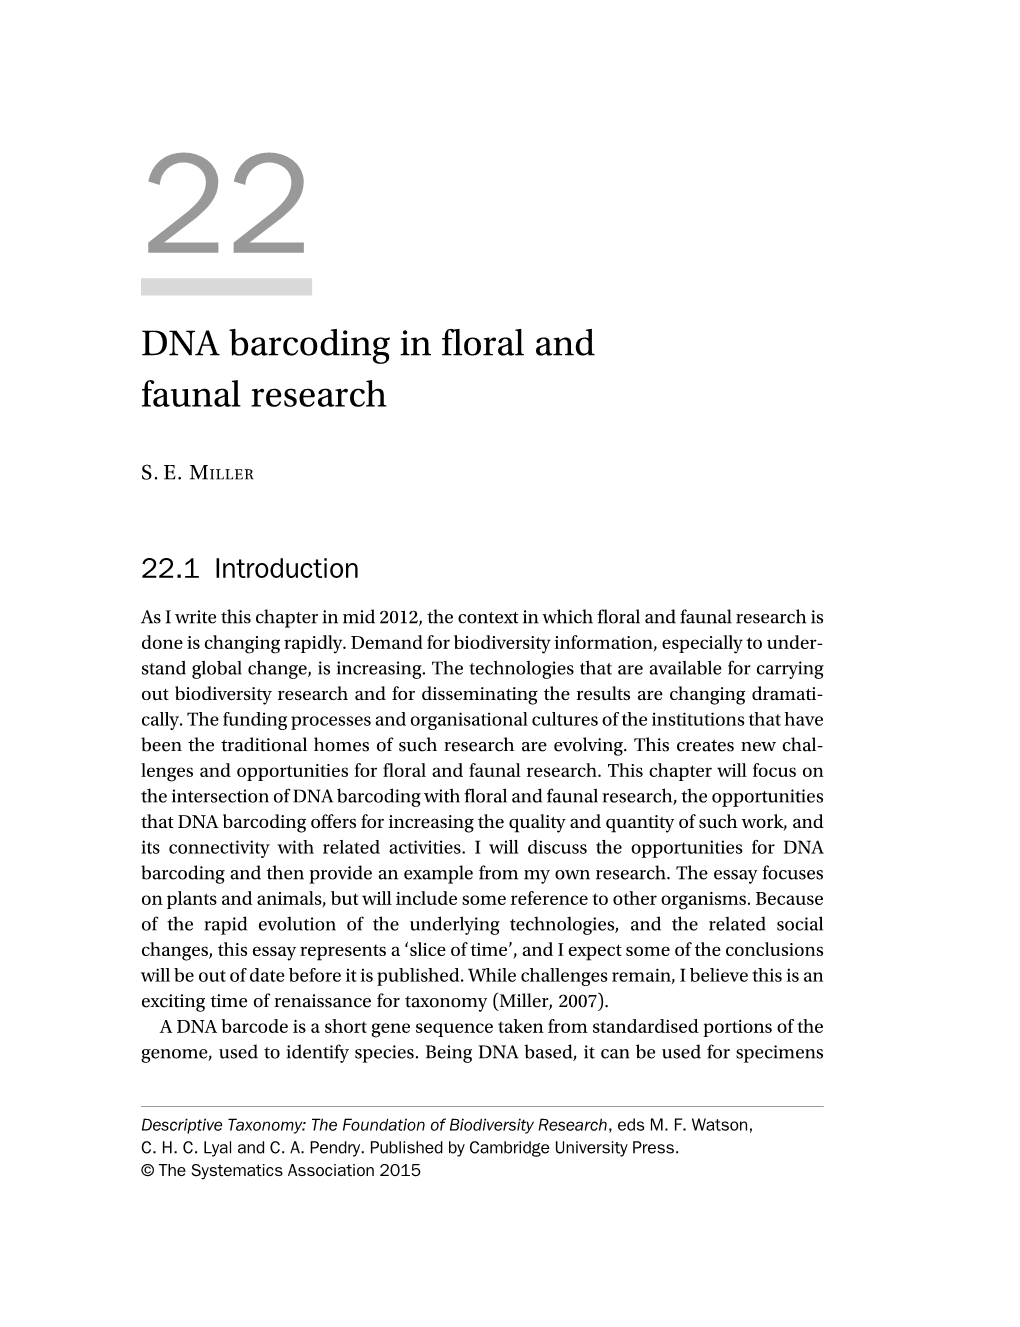 DNA Barcoding in Floral and Faunal Research